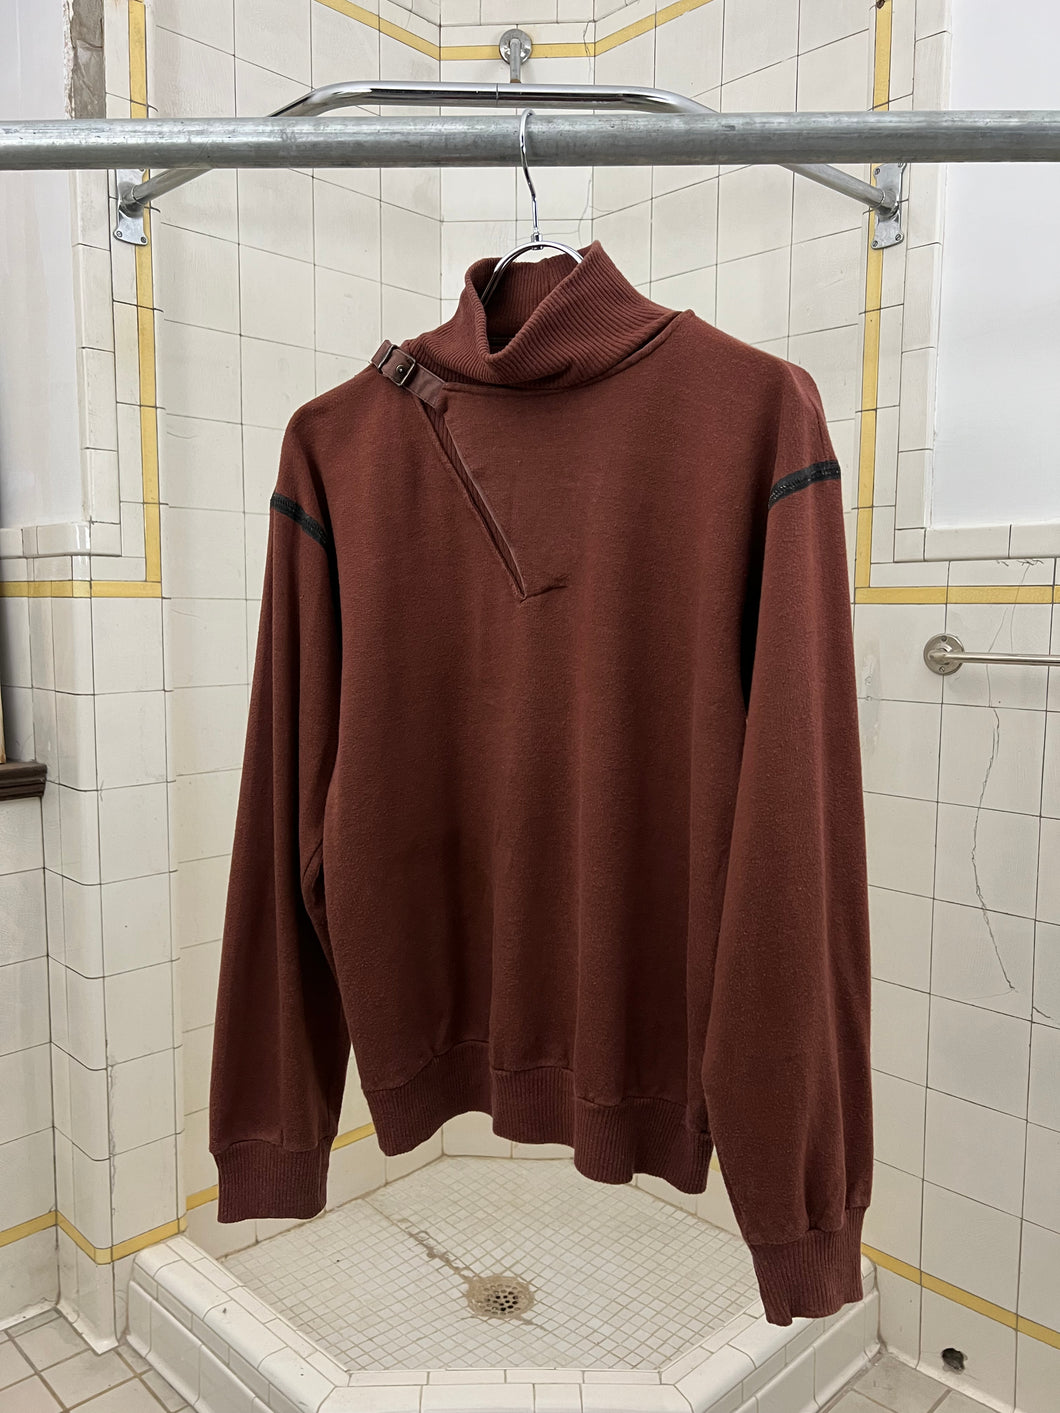 aw1983 Marithe Francois Girbaud x Maillaparty Burnt Red Sweater with Overlocked Neck and Waxed Seam Details - Size S